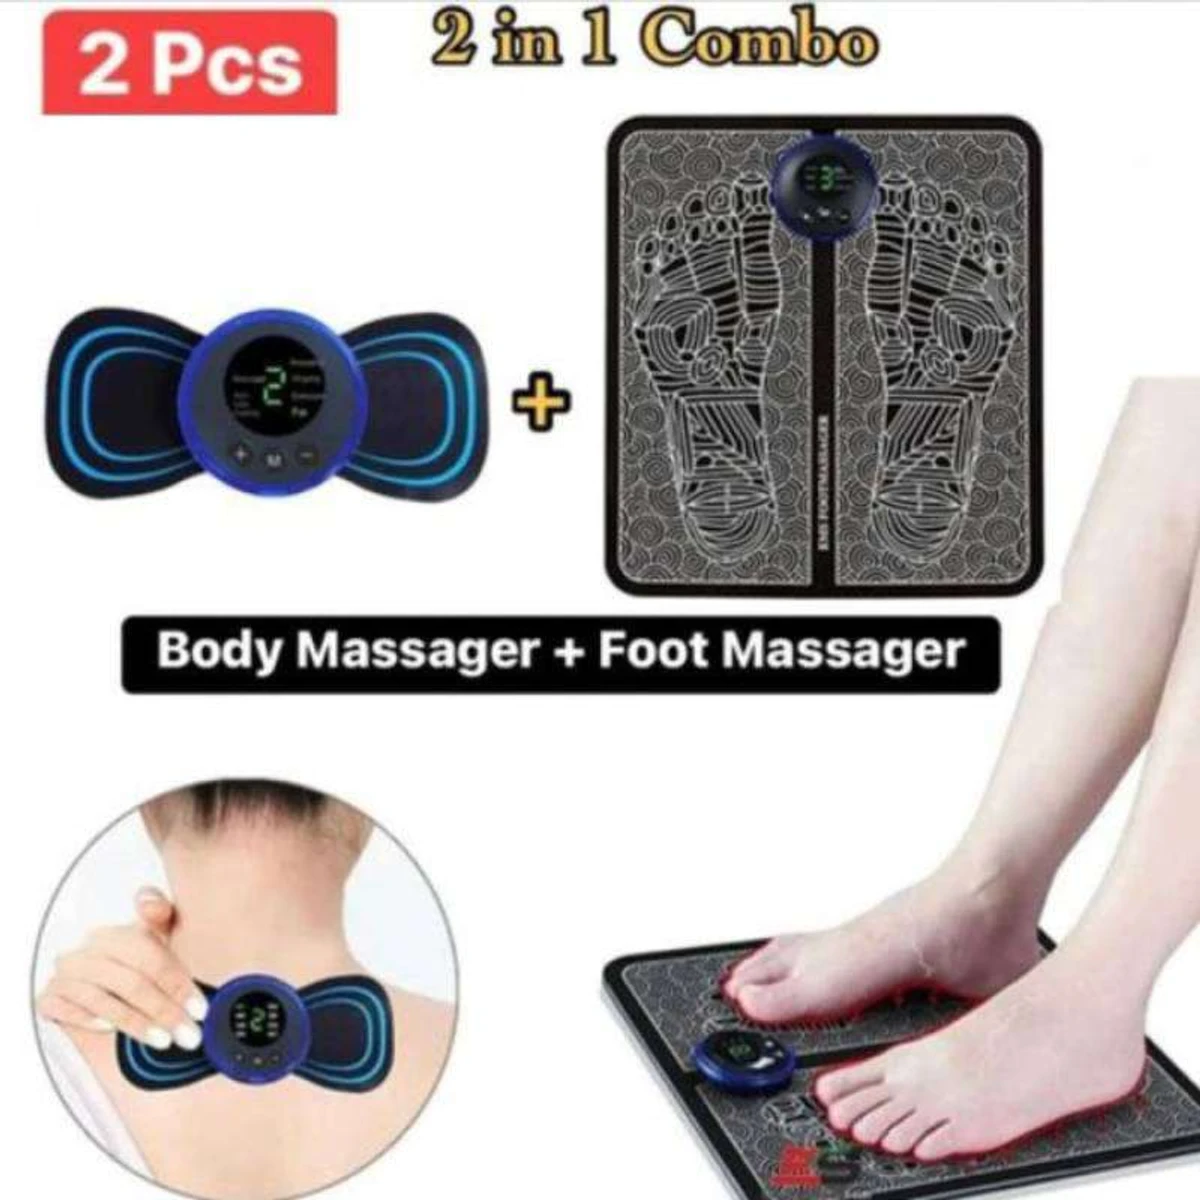 Body and Foot Massager combo package